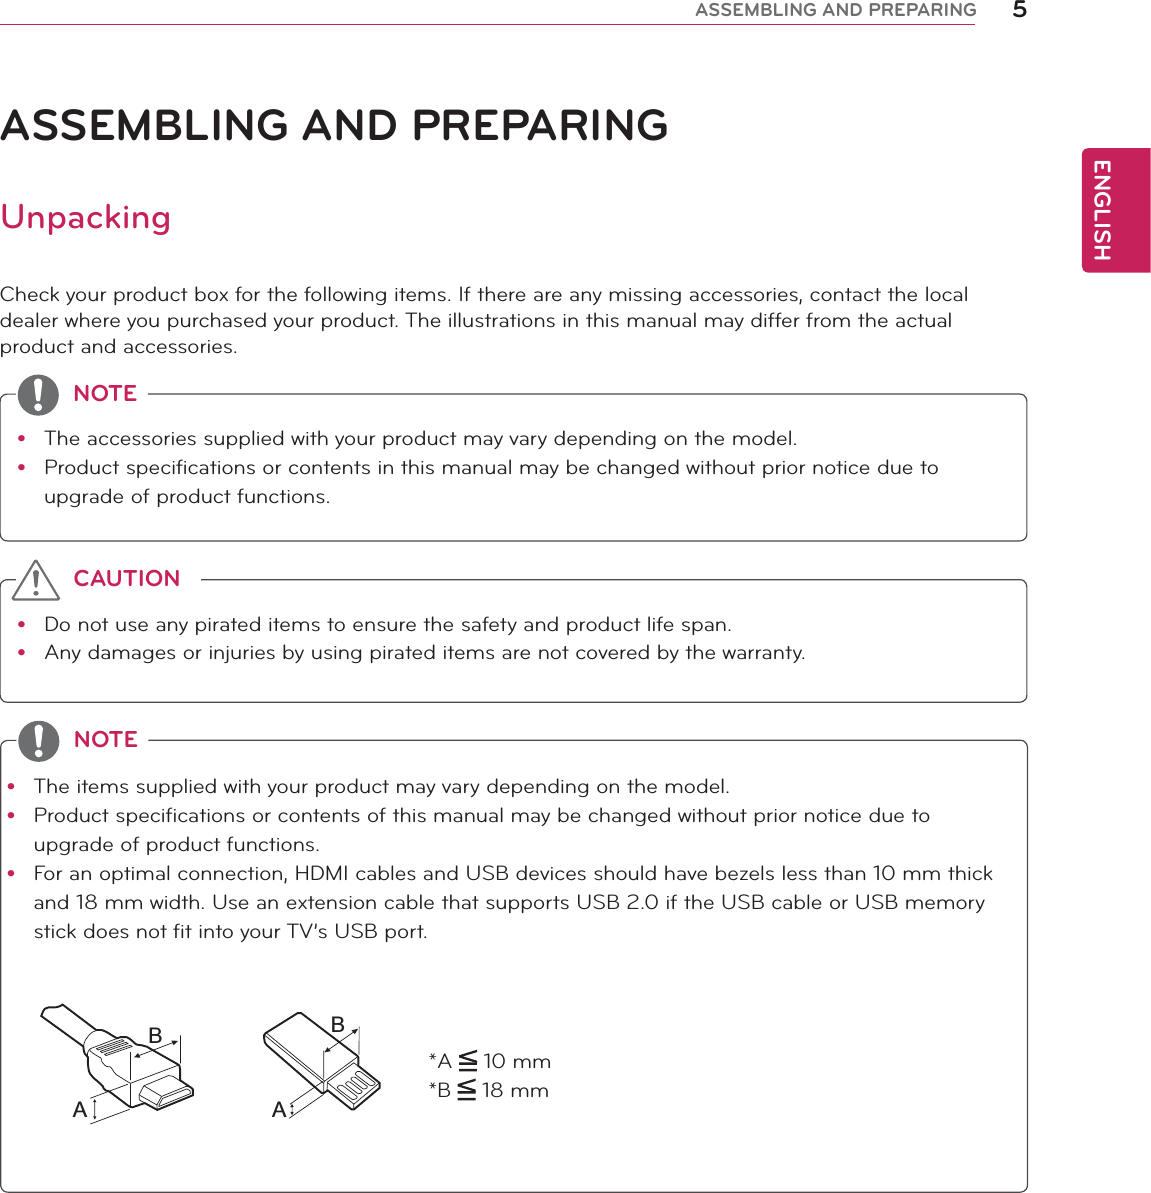 ENGLISH5ASSEMBLING AND PREPARINGASSEMBLING AND PREPARINGUnpackingCheck your product box for the following items. If there are any missing accessories, contact the local dealer where you purchased your product. The illustrations in this manual may differ from the actual product and accessories.y The accessories supplied with your product may vary depending on the model.y Product specifications or contents in this manual may be changed without prior notice due to upgrade of product functions.NOTEy Do not use any pirated items to ensure the safety and product life span.y Any damages or injuries by using pirated items are not covered by the warranty. CAUTIONy The items supplied with your product may vary depending on the model.y Product specifications or contents of this manual may be changed without prior notice due to upgrade of product functions.y For an optimal connection, HDMI cables and USB devices should have bezels less than 10 mm thick and 18 mm width. Use an extension cable that supports USB 2.0 if the USB cable or USB memory stick does not fit into your TV’s USB port.NOTE*A   10 mm*B   18 mmABAB